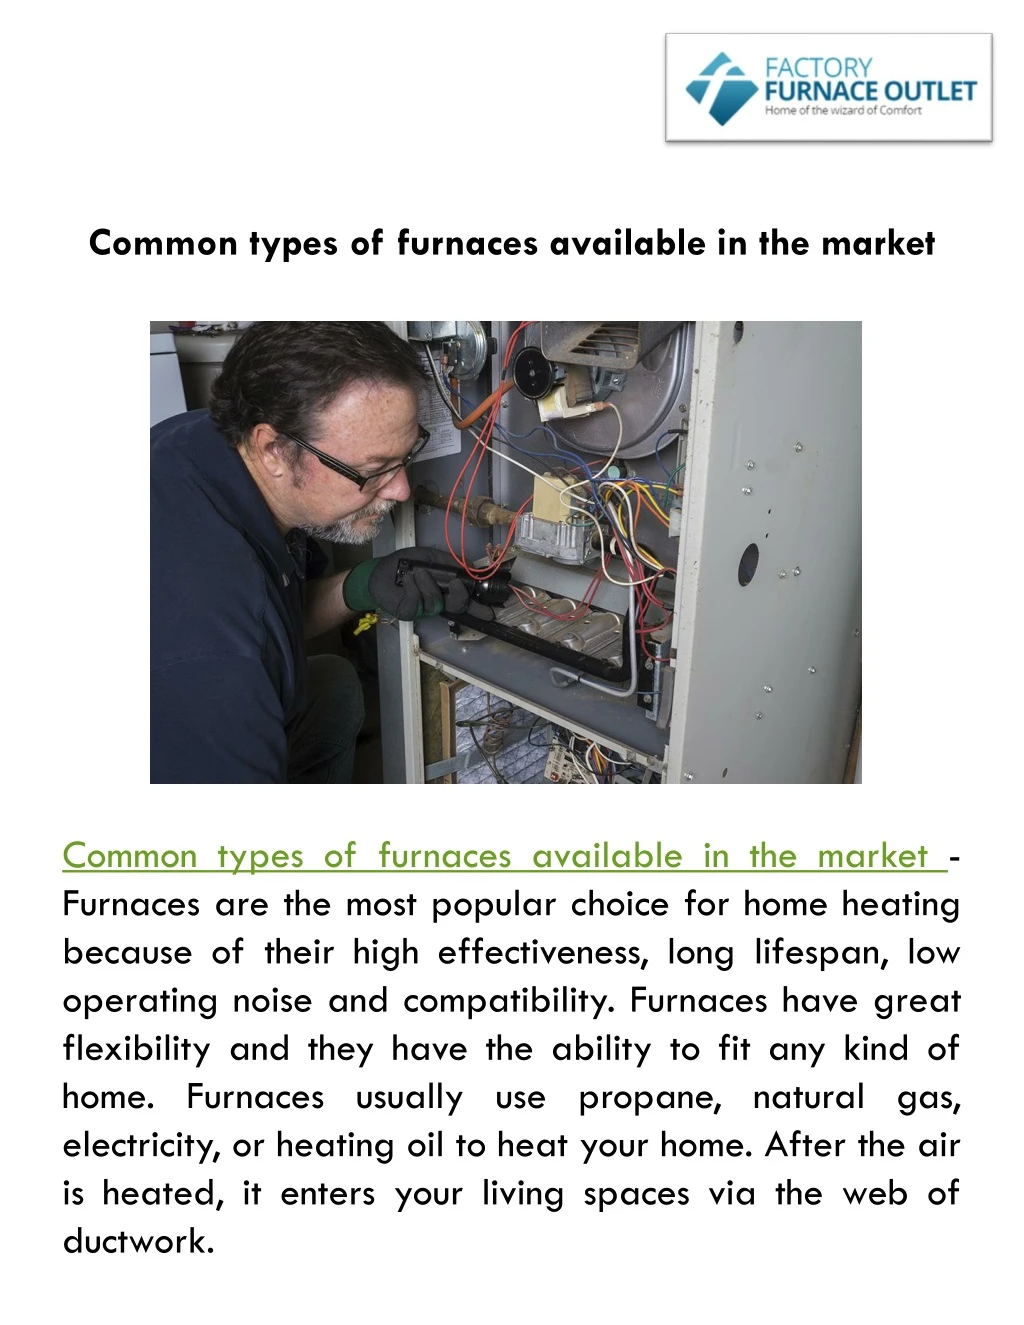 common types of furnaces available in the market